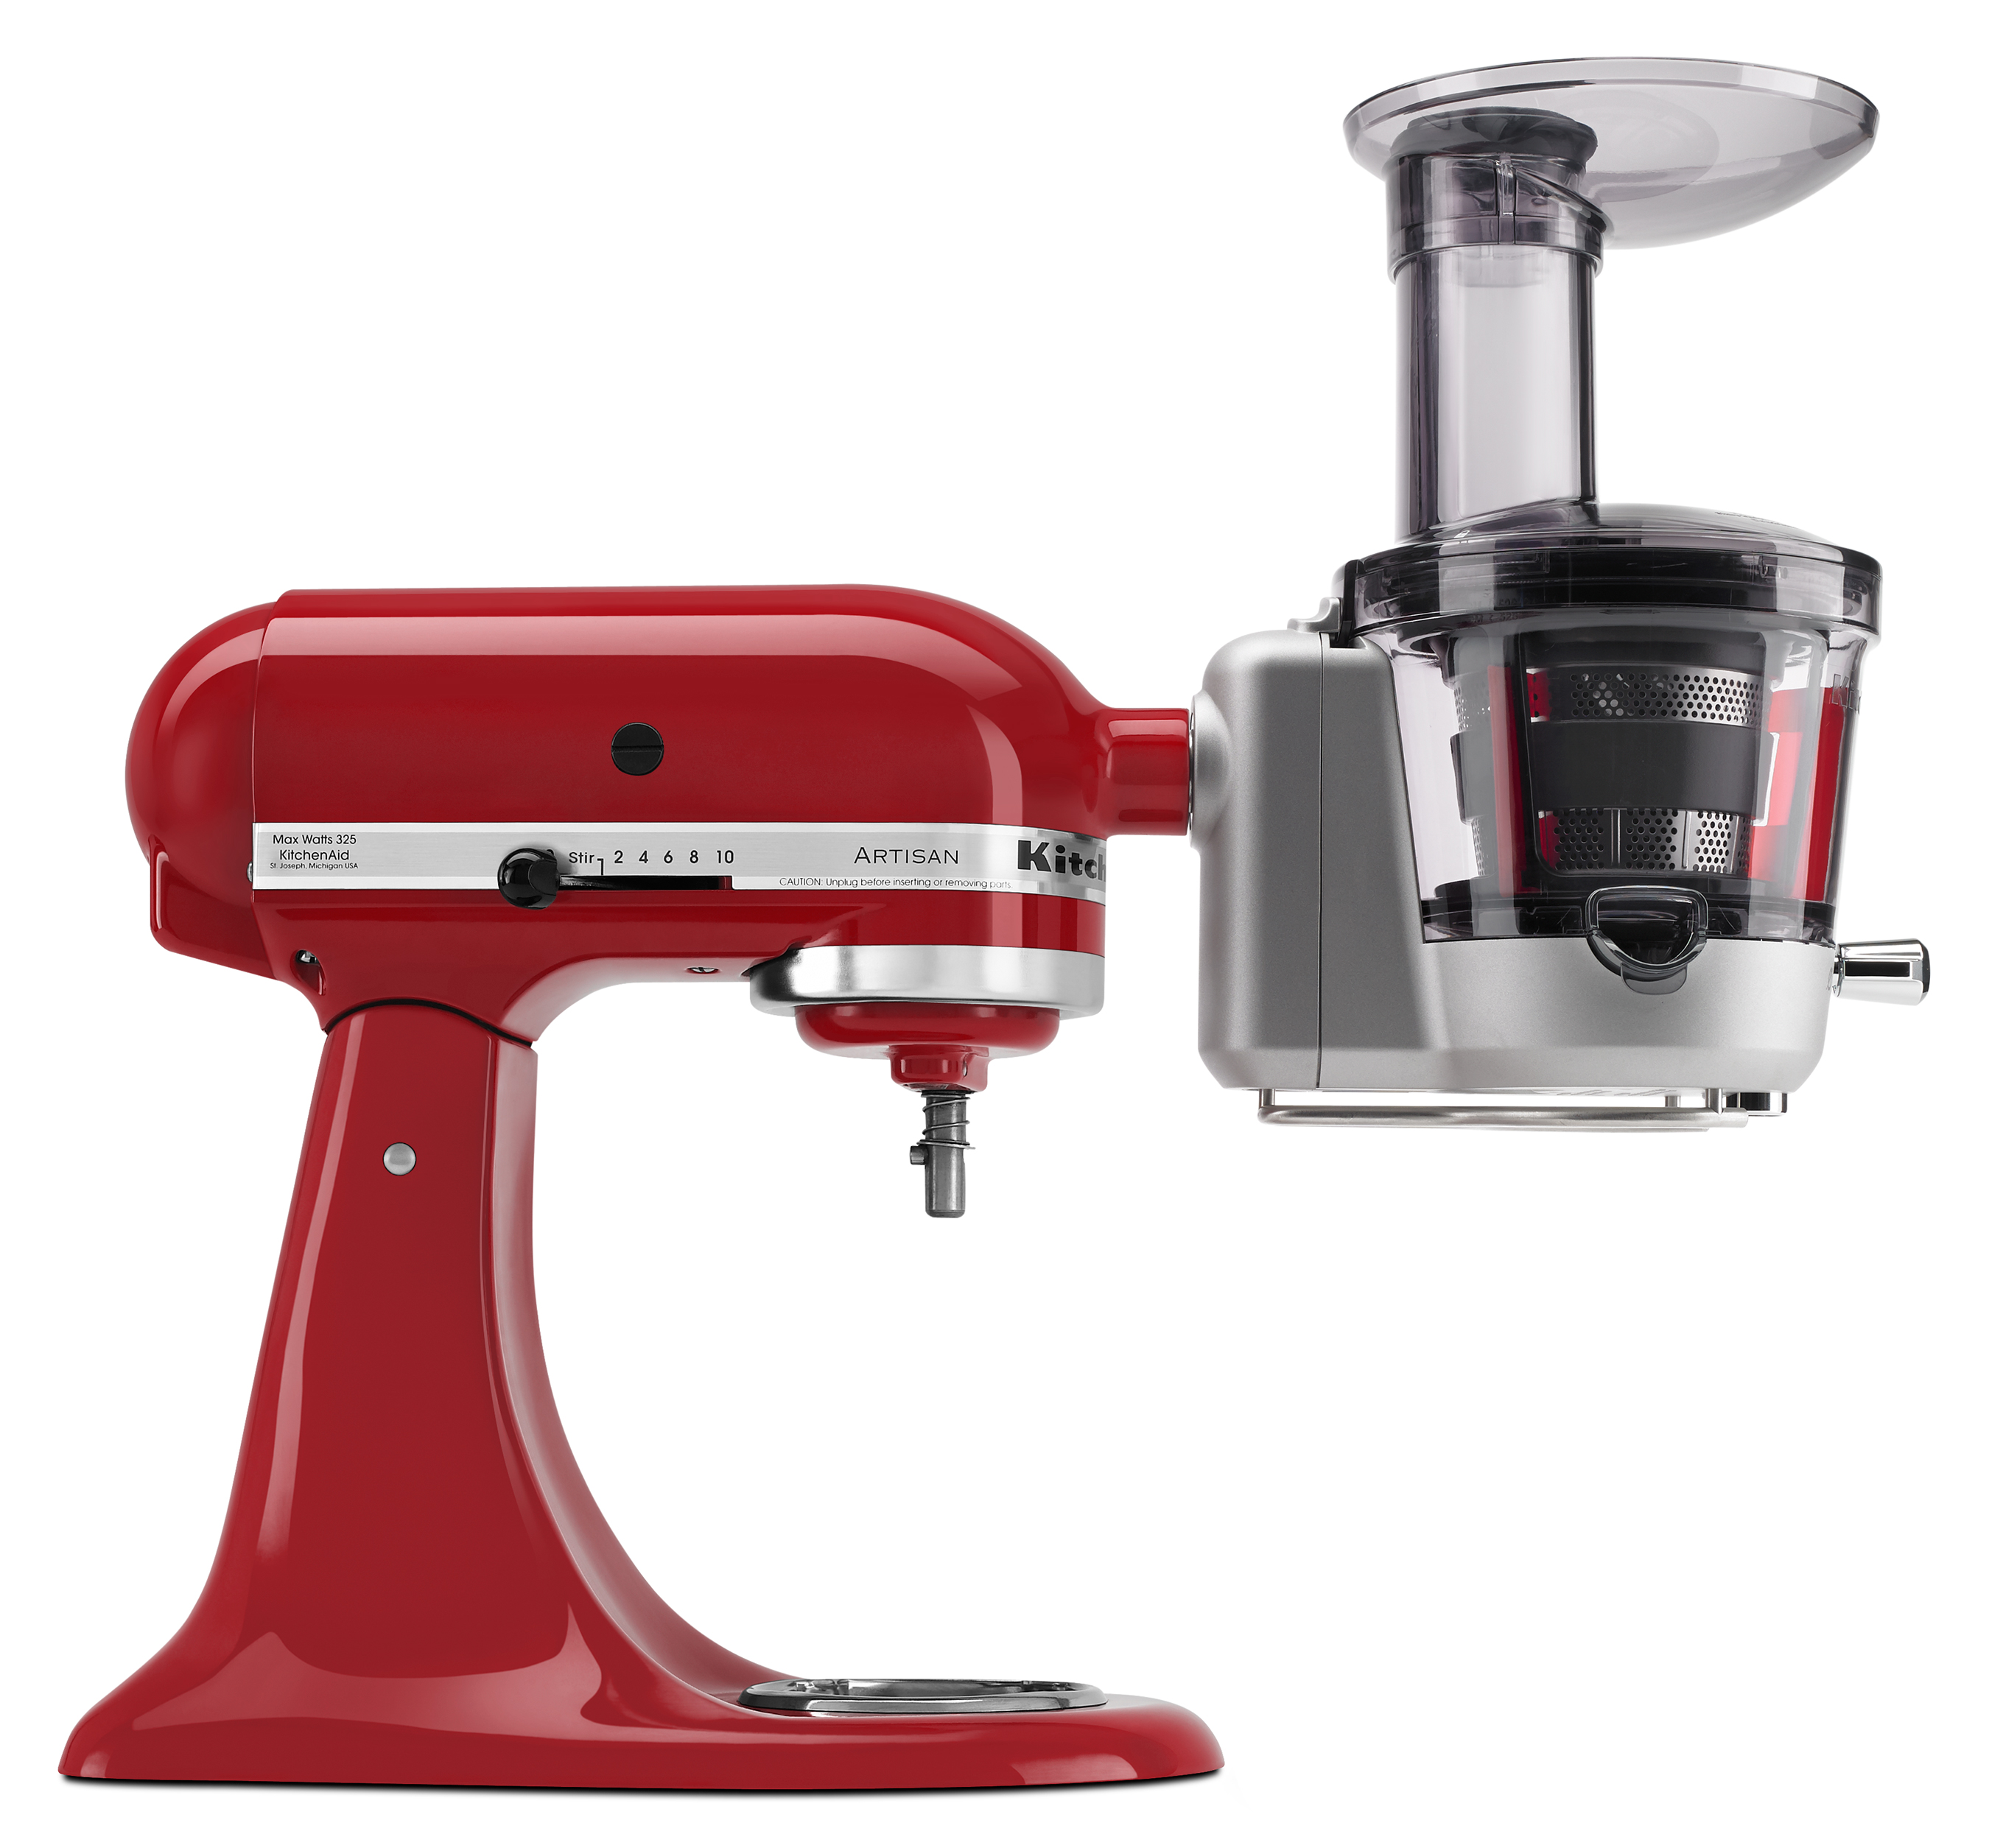 The juicer attachment’s stainless steel blade first pre-slices foods, then processes them at a low speed. It includes three pulp screens to customize juices, and is available for $249.99.